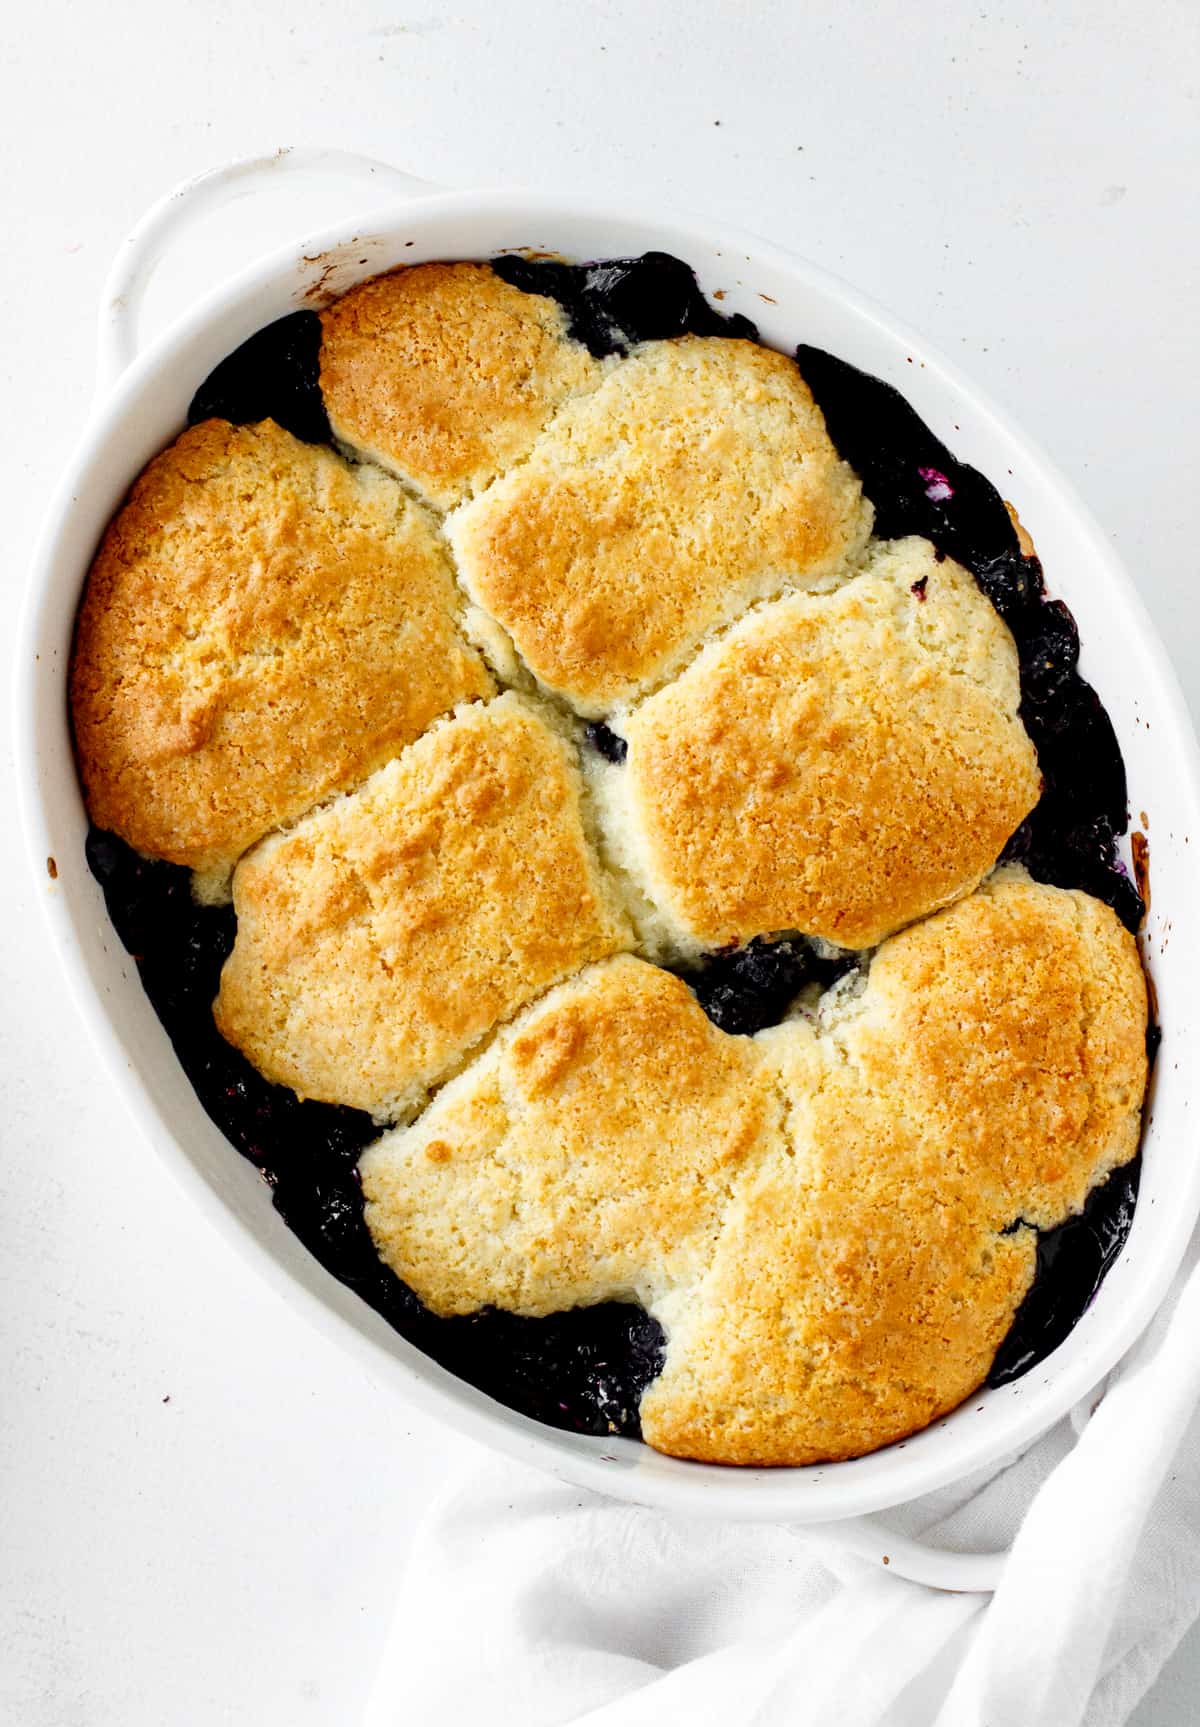 Overview of baked blueberry cobbler in oval dish on a white surface.